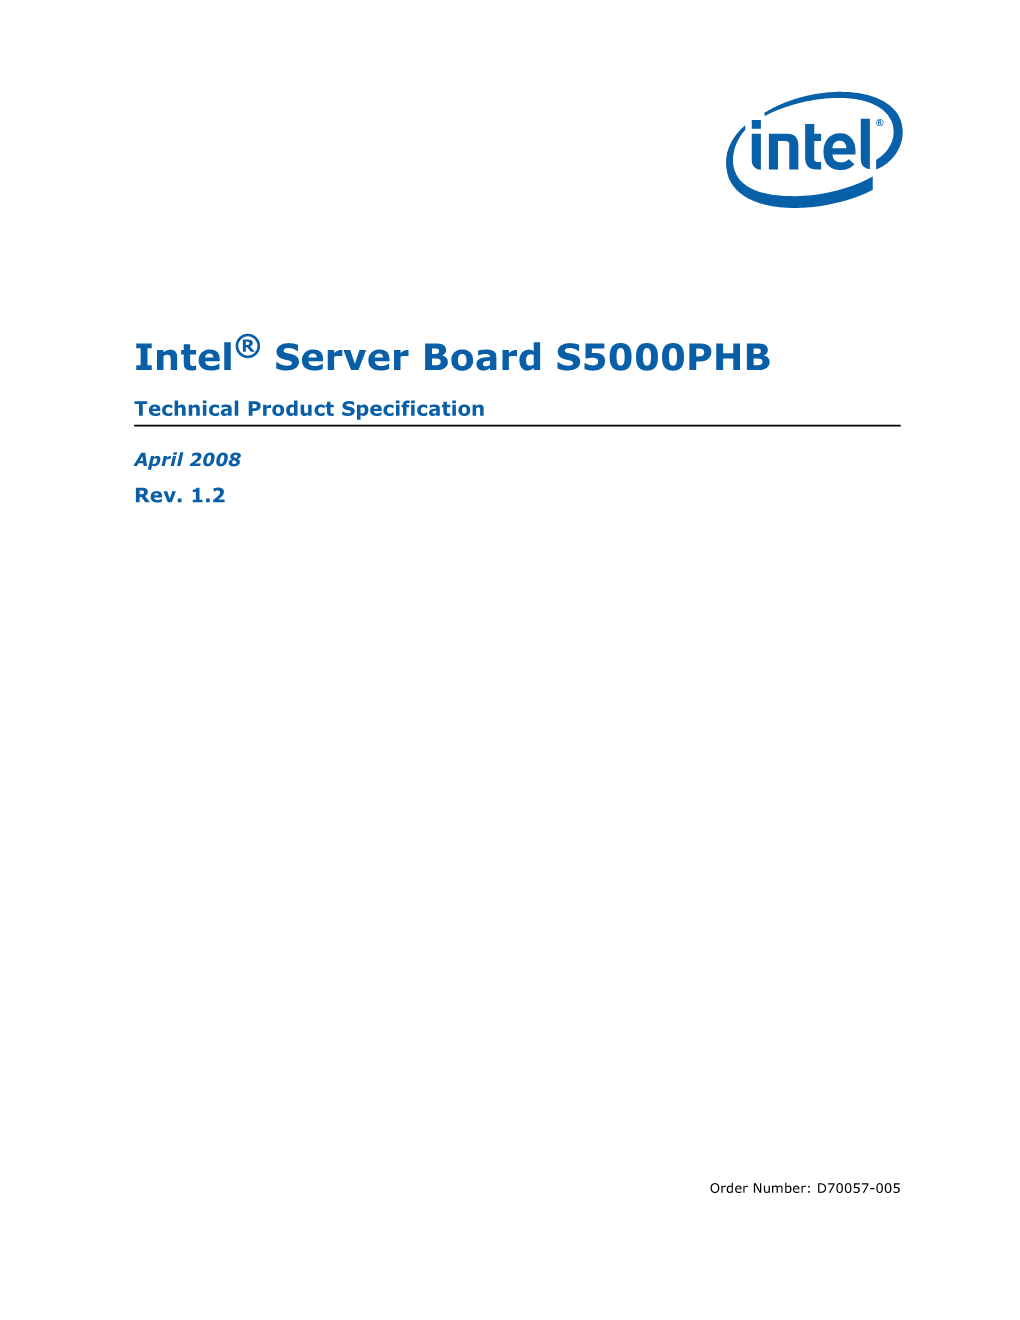 Intel® Server Board S5000PHB Technical Product Specification